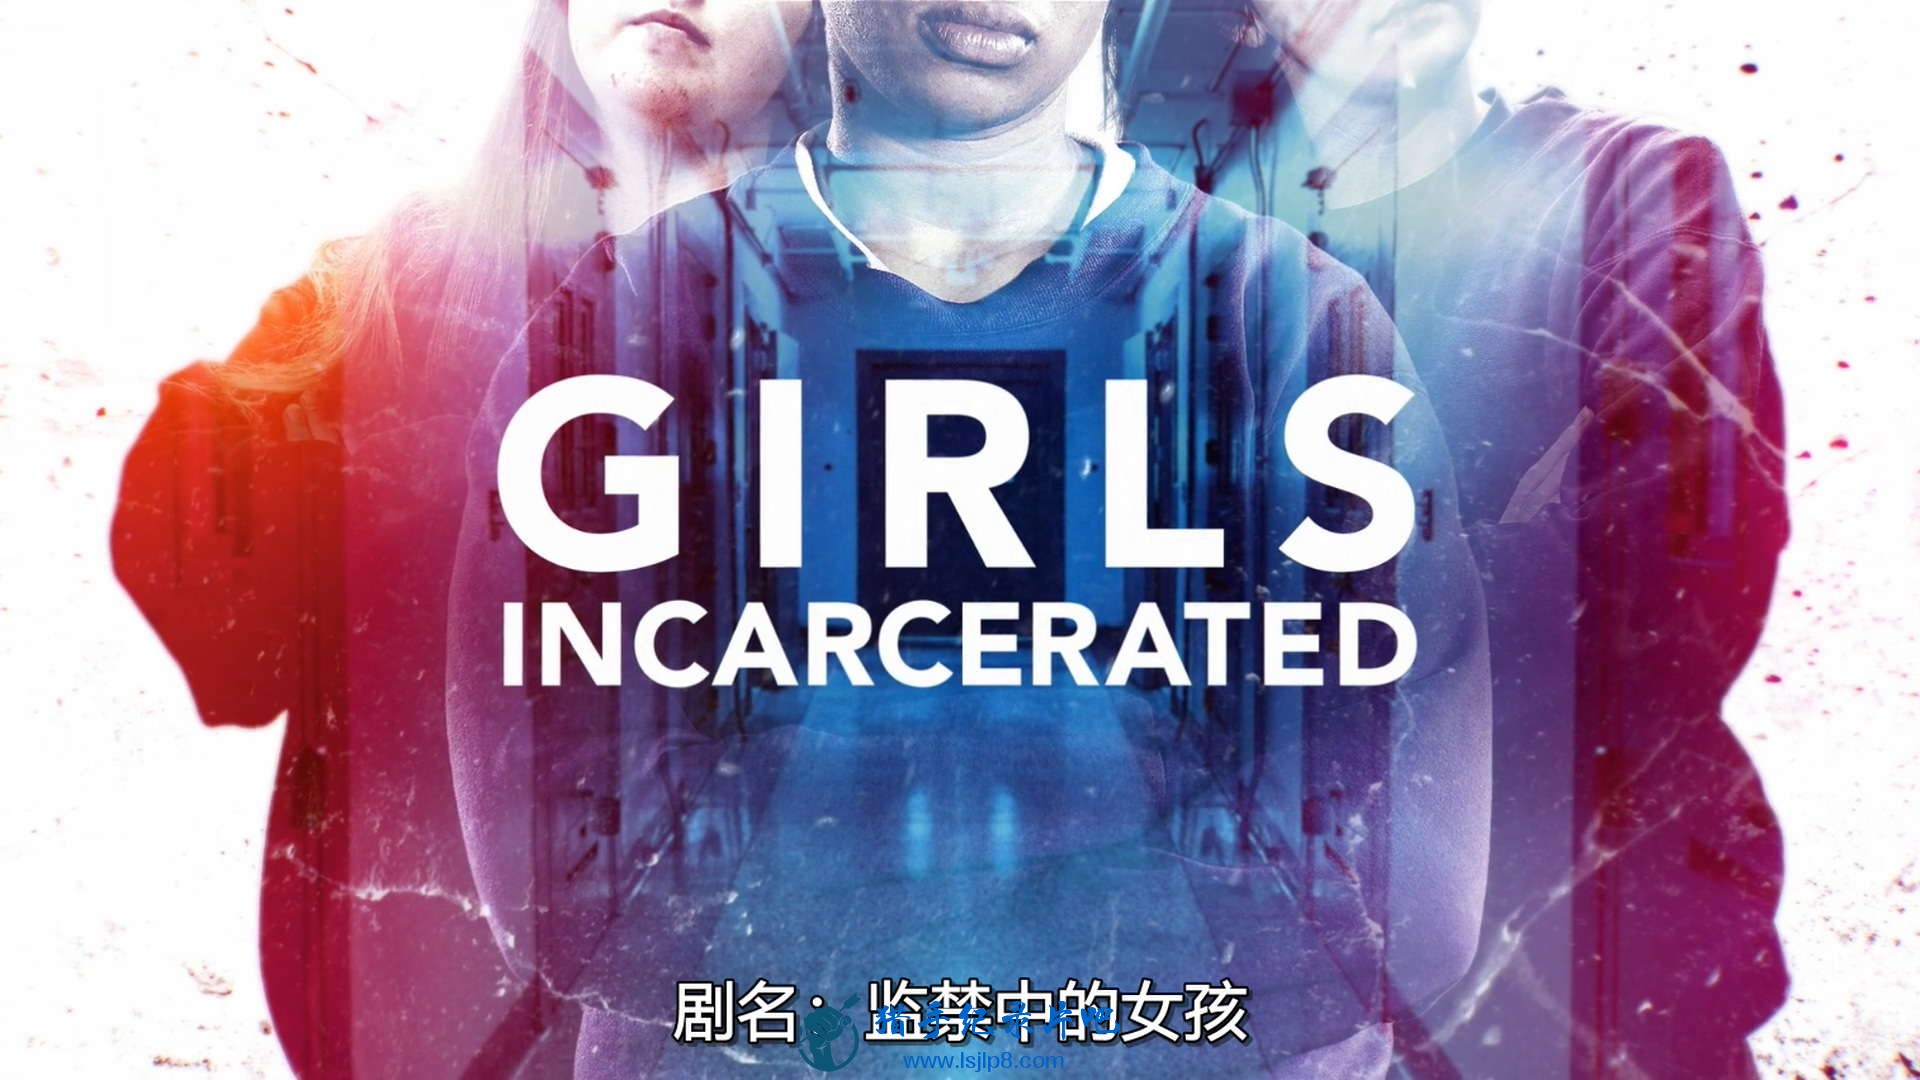 Girls Incarcerated S01E08 Chapter 8 Moving Mountains 1080p Netflix WEB-DL DD5.1 .jpg